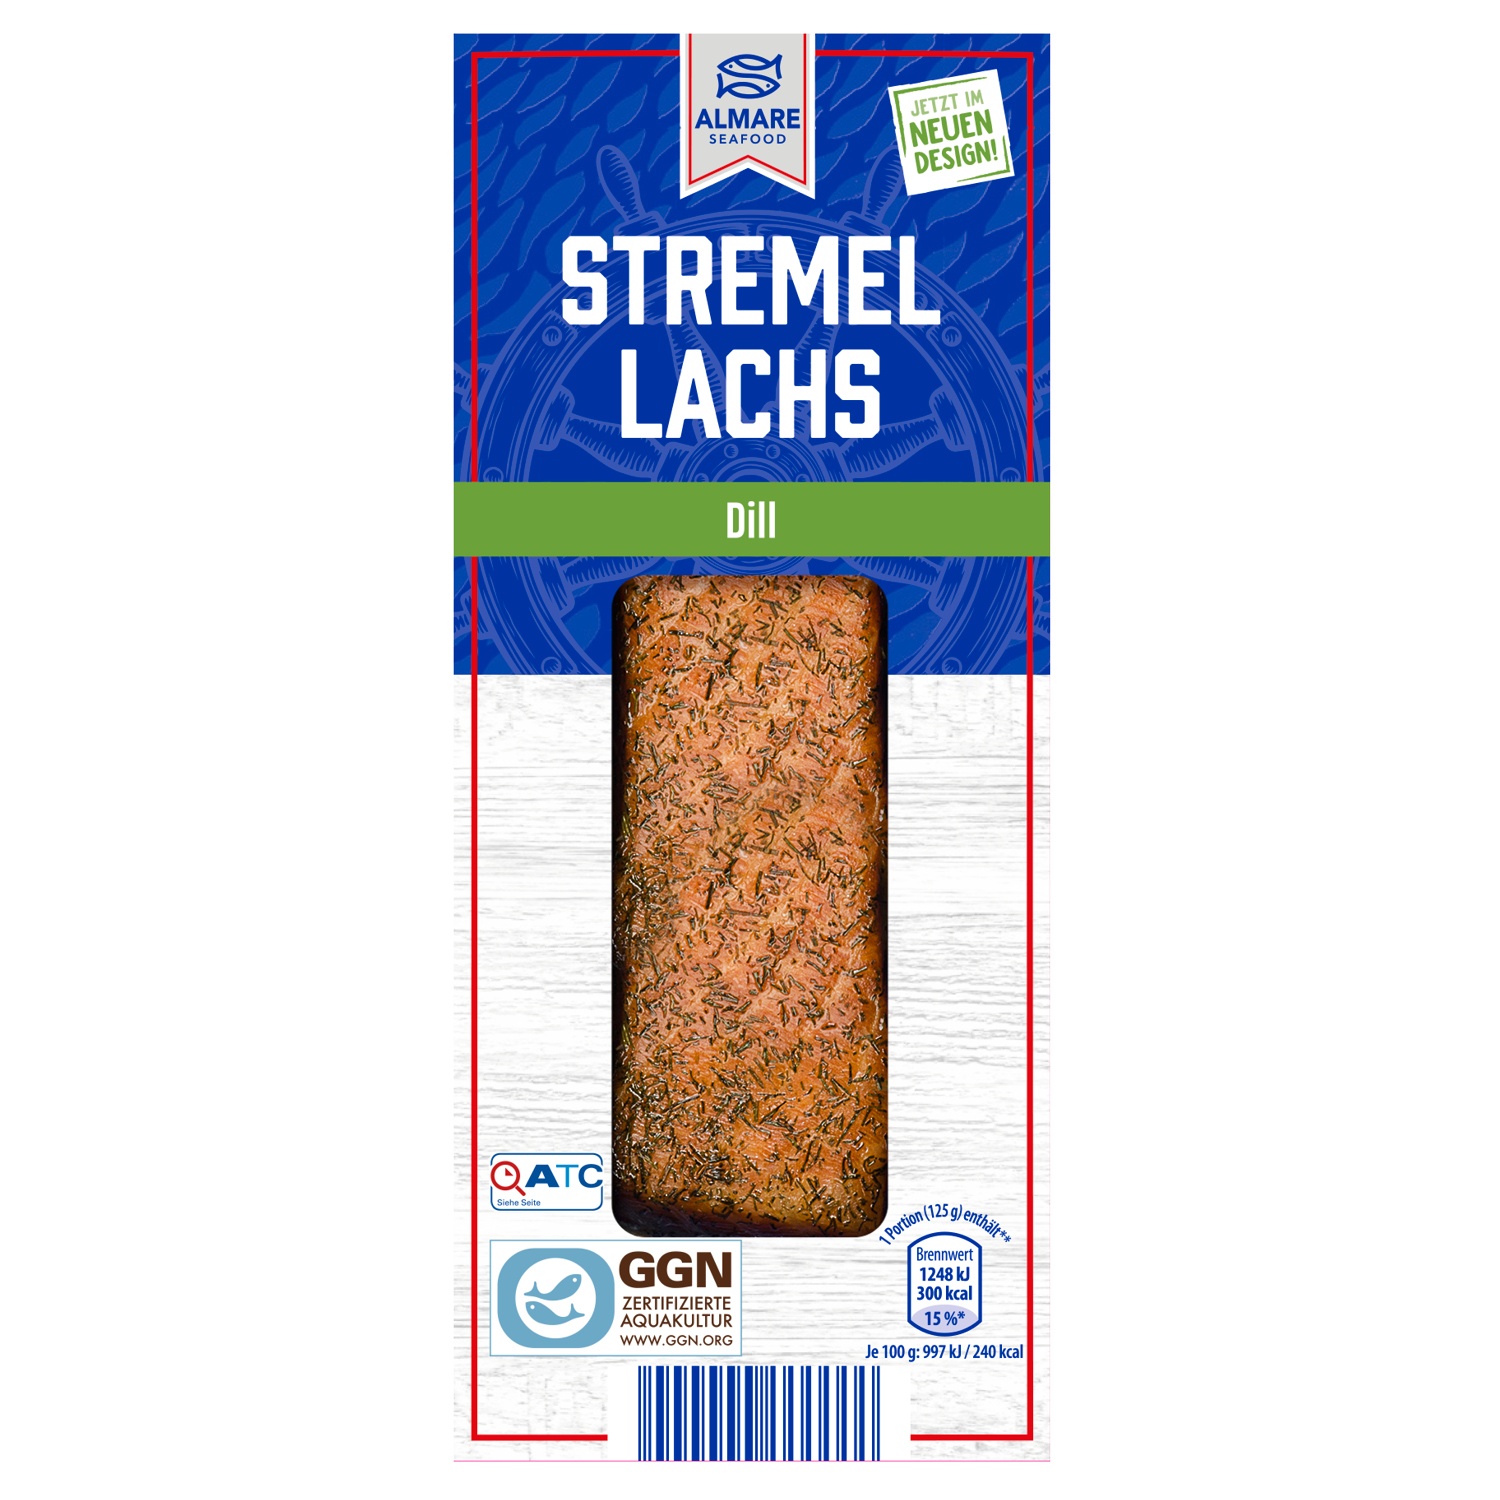 ALMARE SEAFOOD Stremellachs 125 g